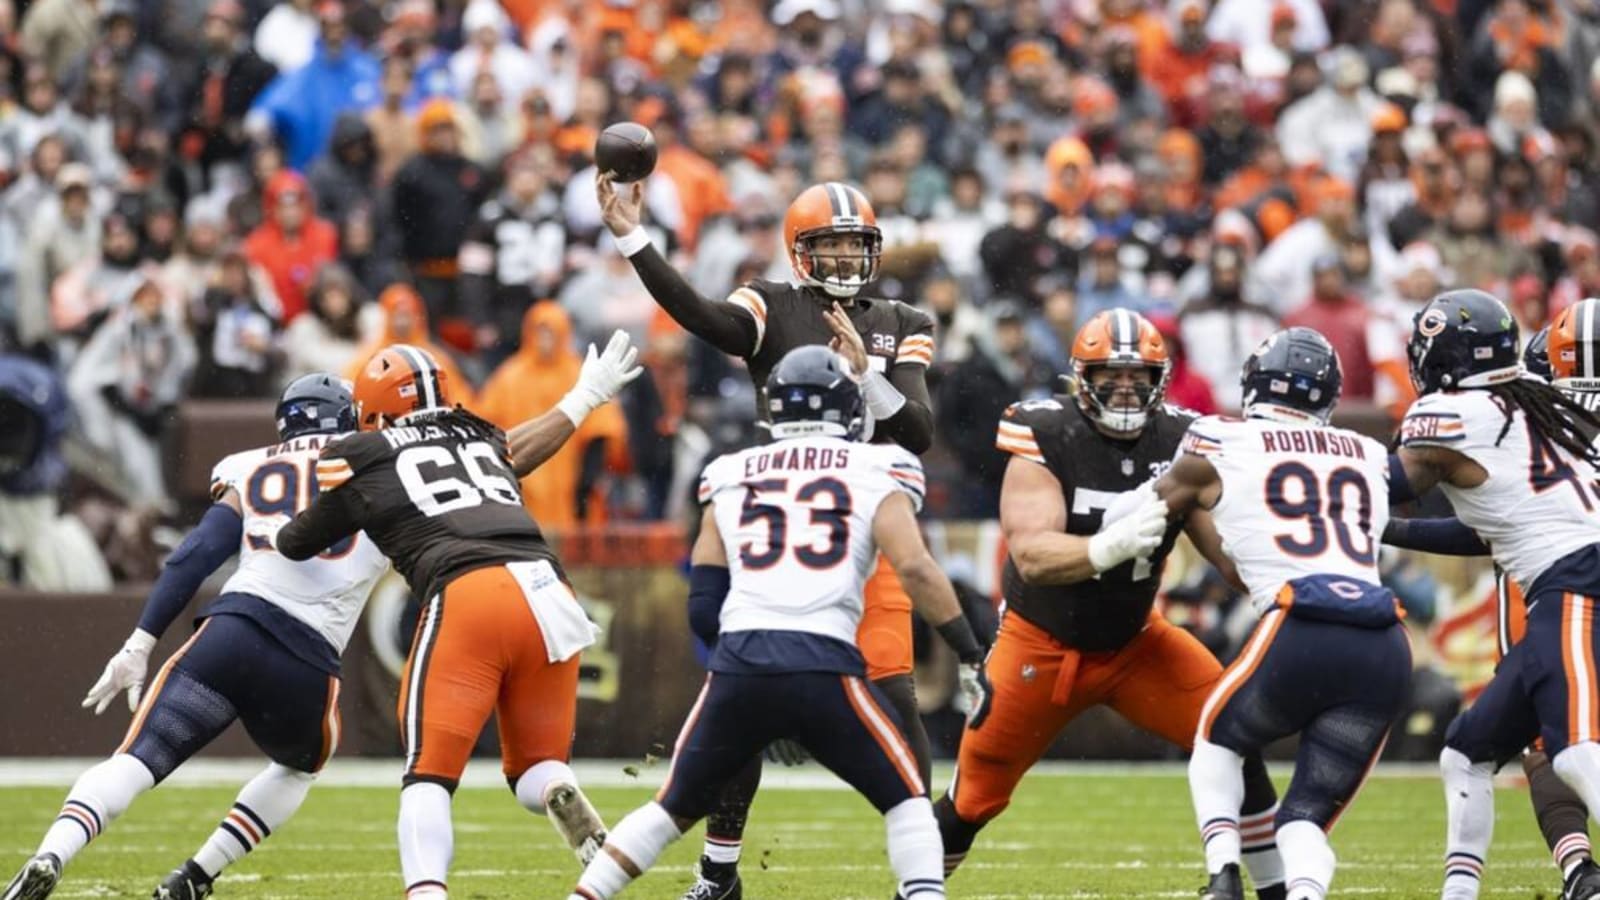 Browns overcome major obstacle to defeat Bears to move to 9-5